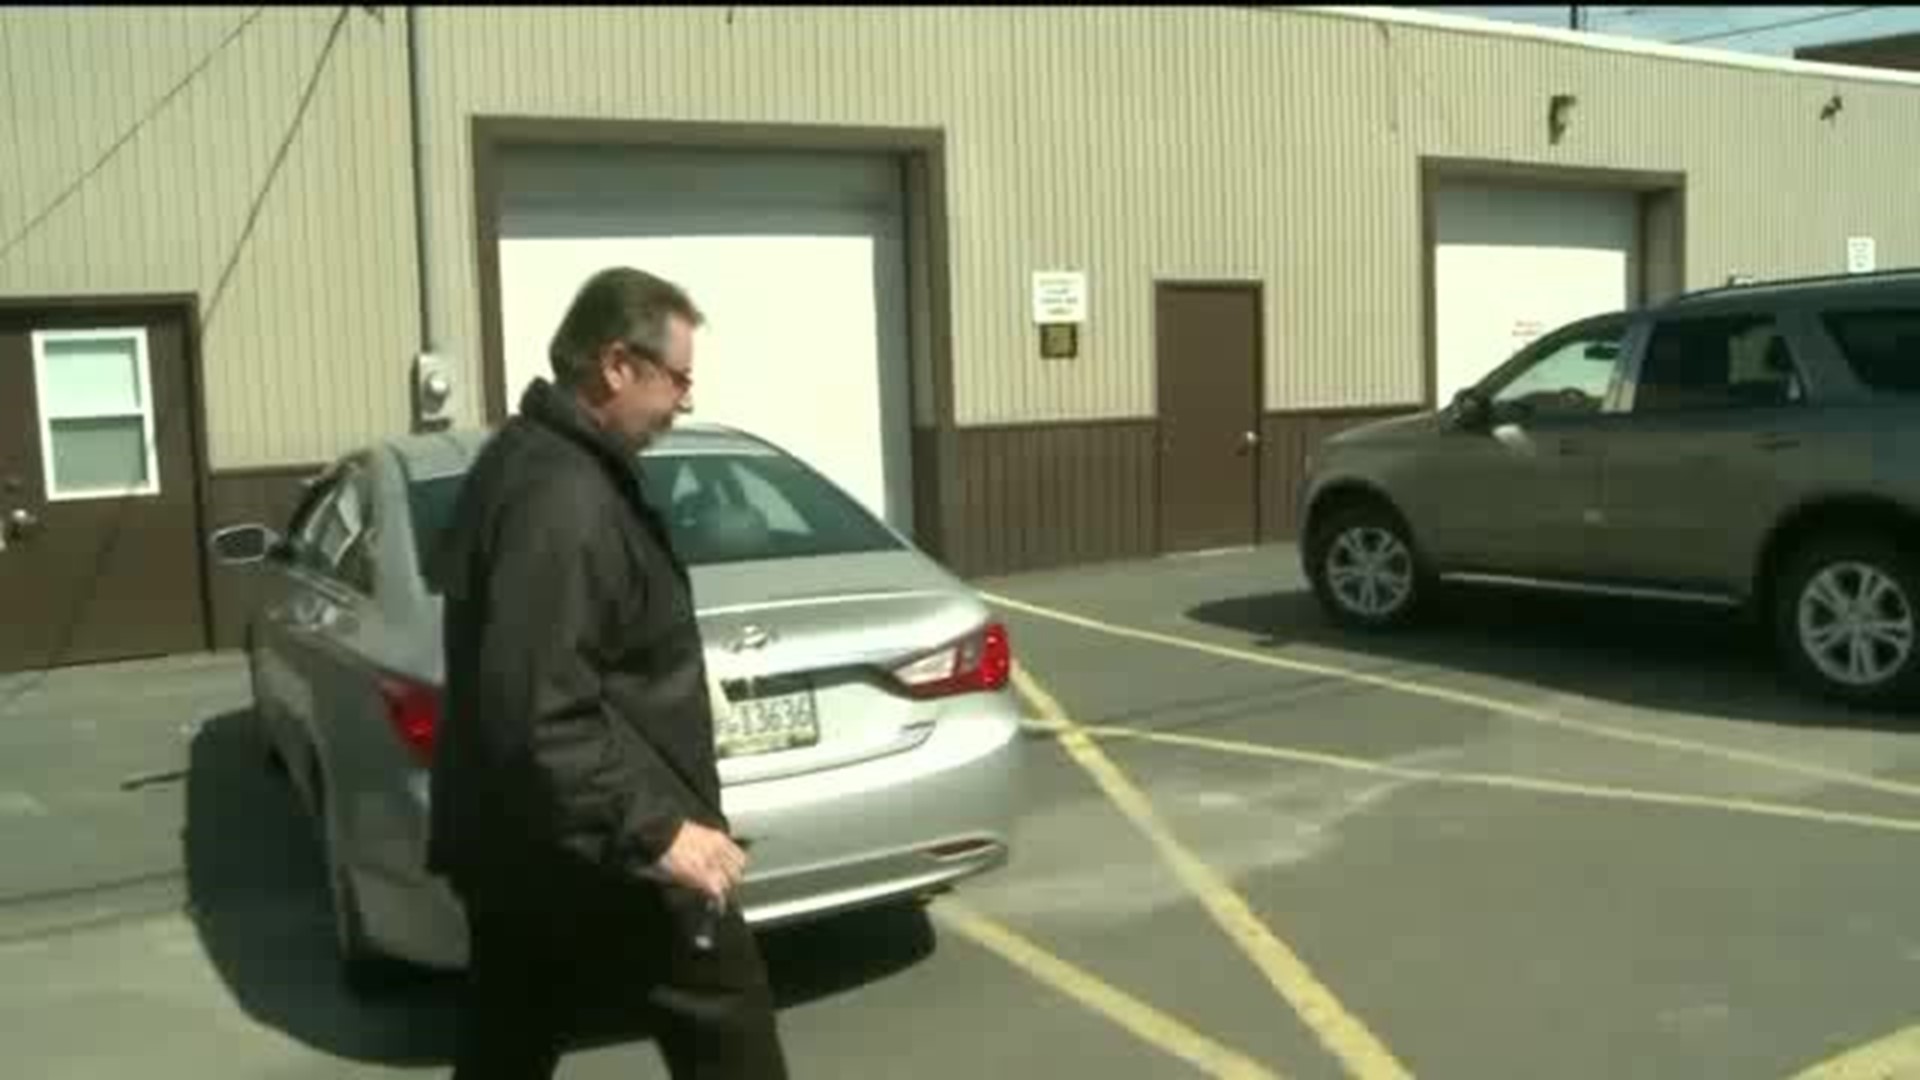 Funeral Director Charged With Forgery, Fraud